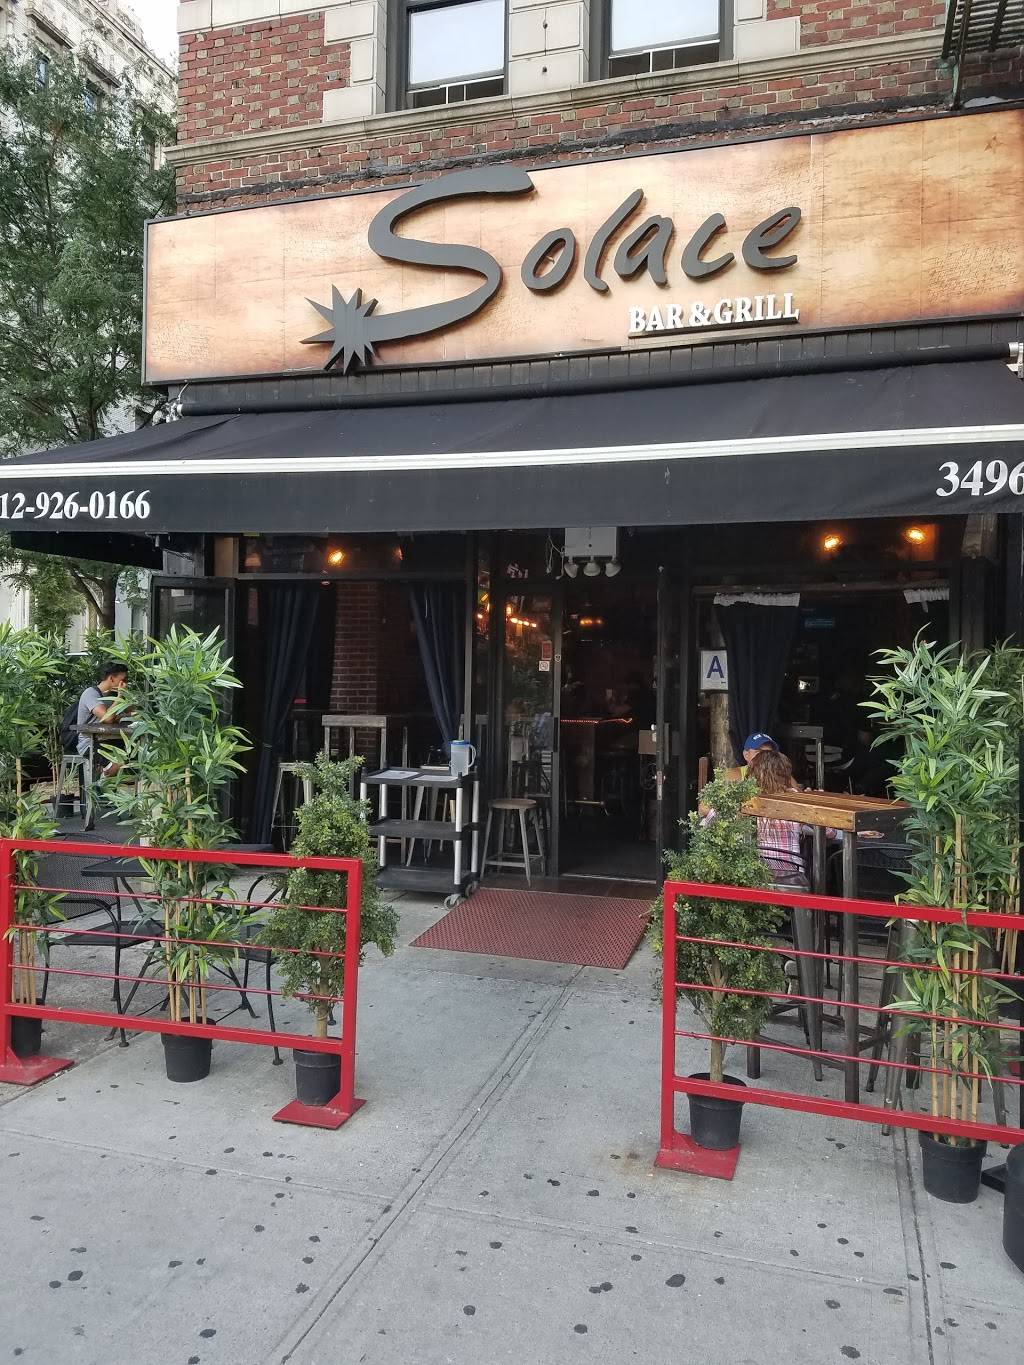 Solace Bar & Grill | restaurant | 3496 Broadway, New York, NY 10031, USA | 2129260166 OR +1 212-926-0166